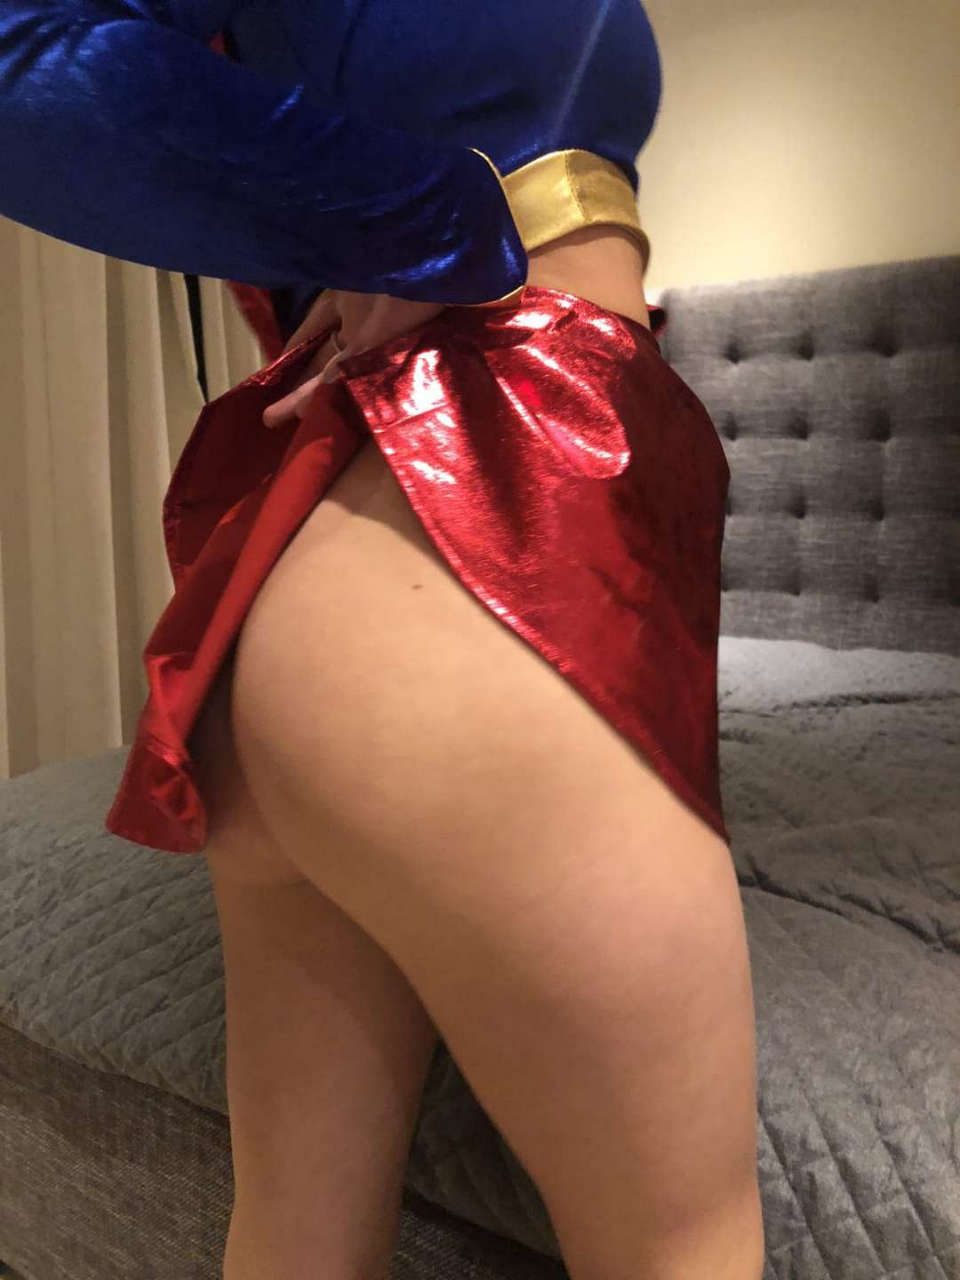 Me As Supergirl If You Like Costumes And Role Play Then Hmu My Kik Is Sounds0fsumme